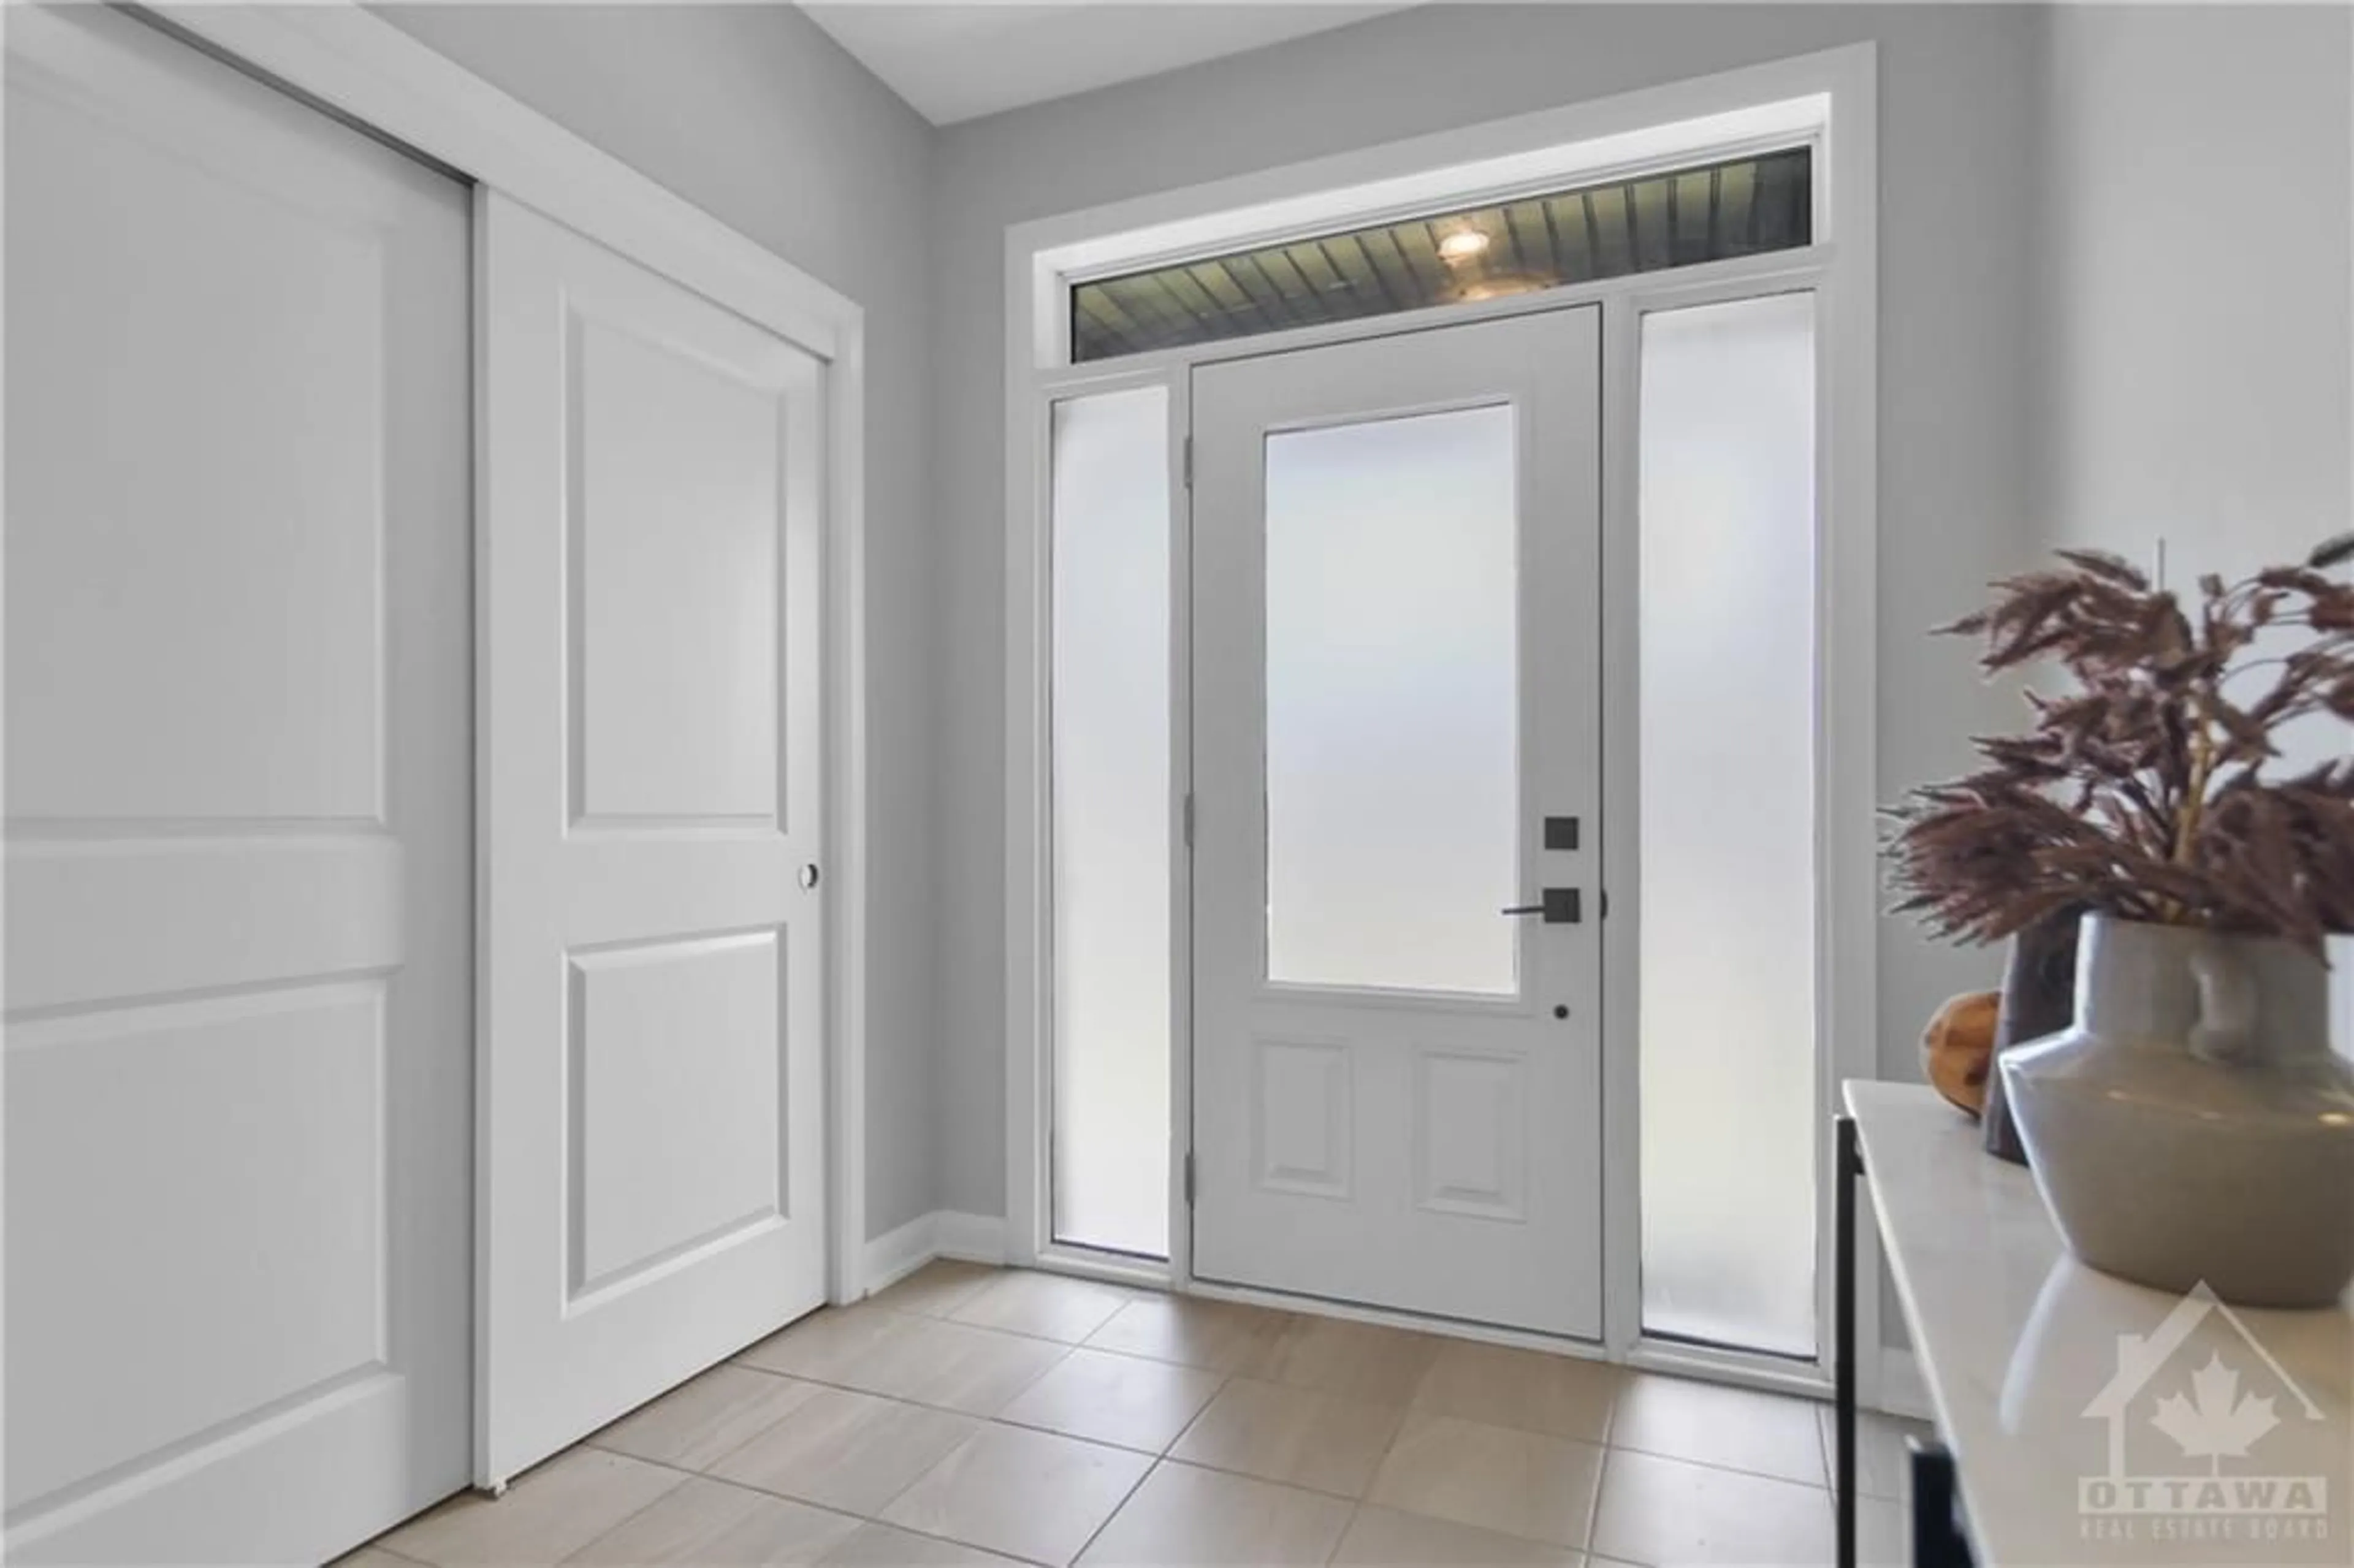 Indoor entryway for 802 CAPPAMORE Dr, Ottawa Ontario K2J 6V6